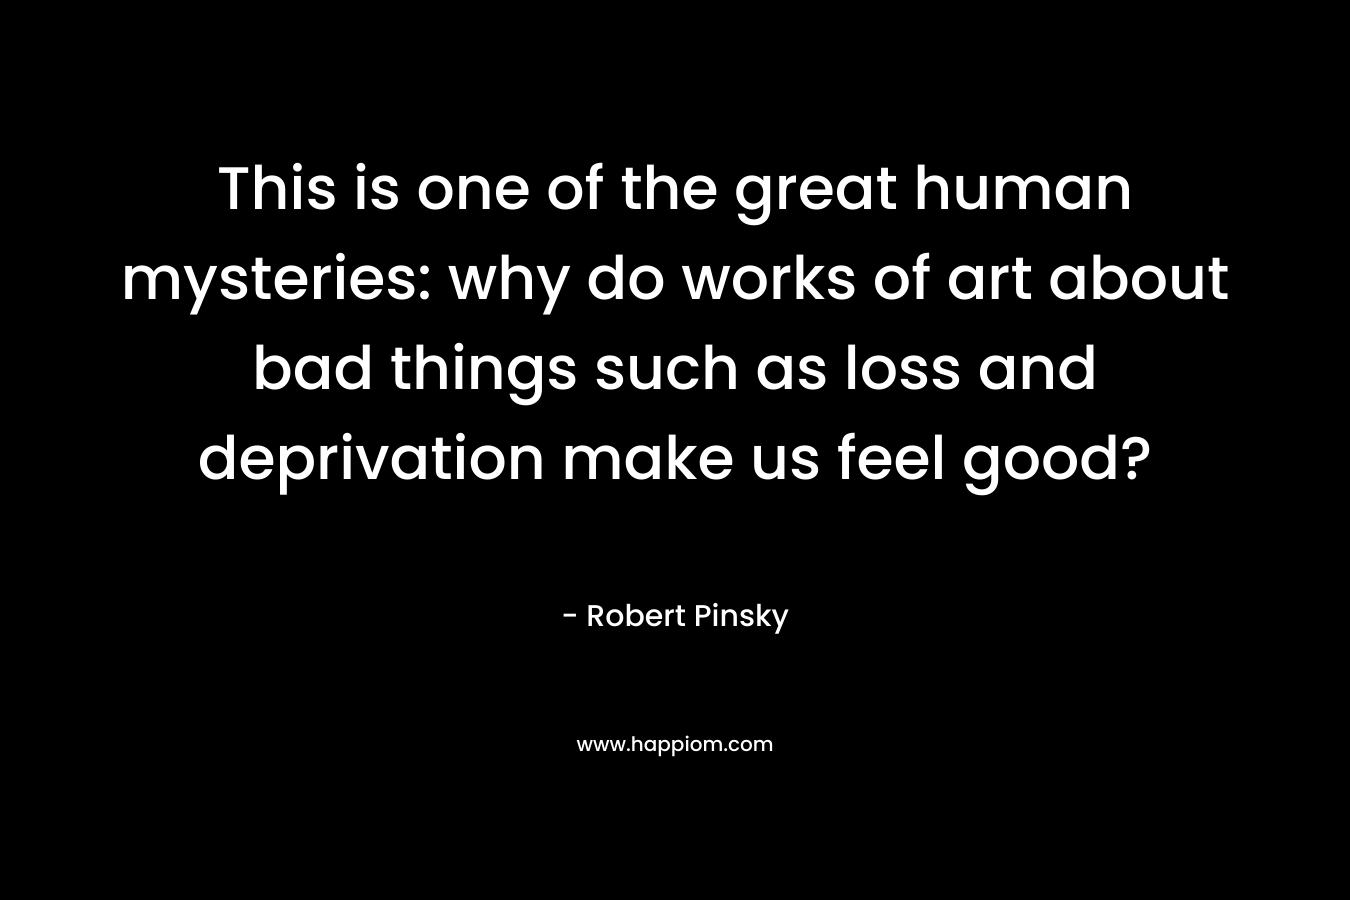 This is one of the great human mysteries: why do works of art about bad things such as loss and deprivation make us feel good? – Robert Pinsky